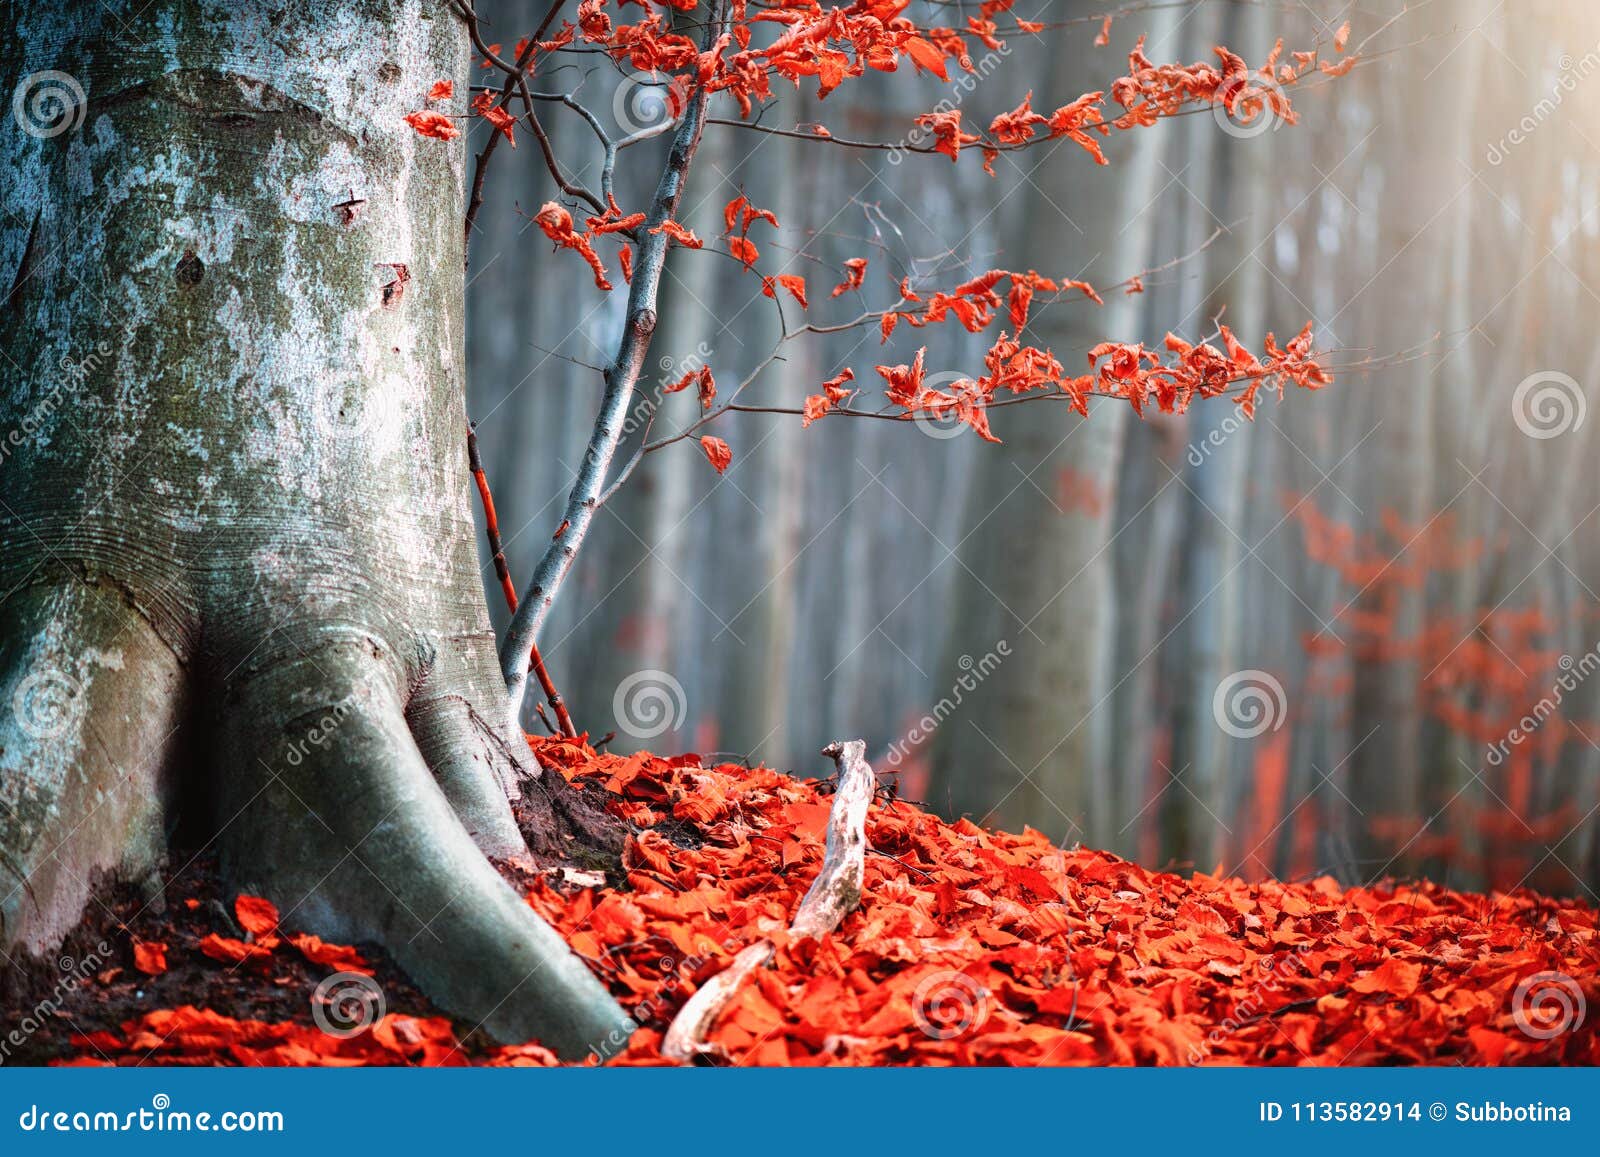 autumn nature scene. fantasy fall landscape. beautiful autumnal park with red leaves and old trees